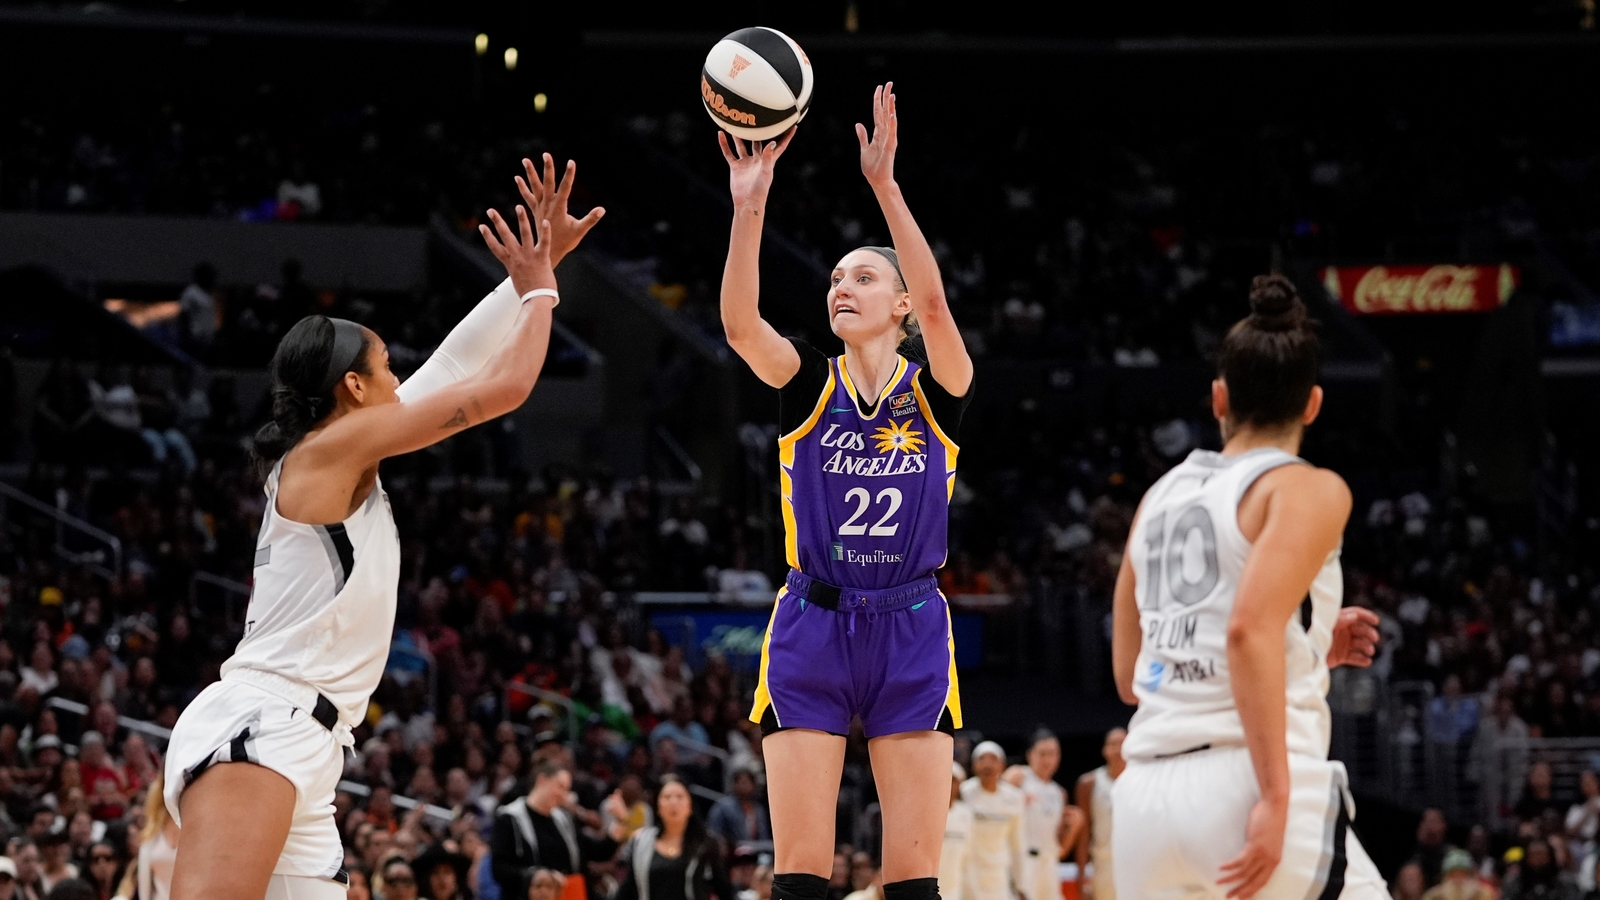 Cameron Brink injury: Los Angeles Sparks WNBA rookie, Paris 2024 Olympics Team USA player tears ACL in left knee [Video]